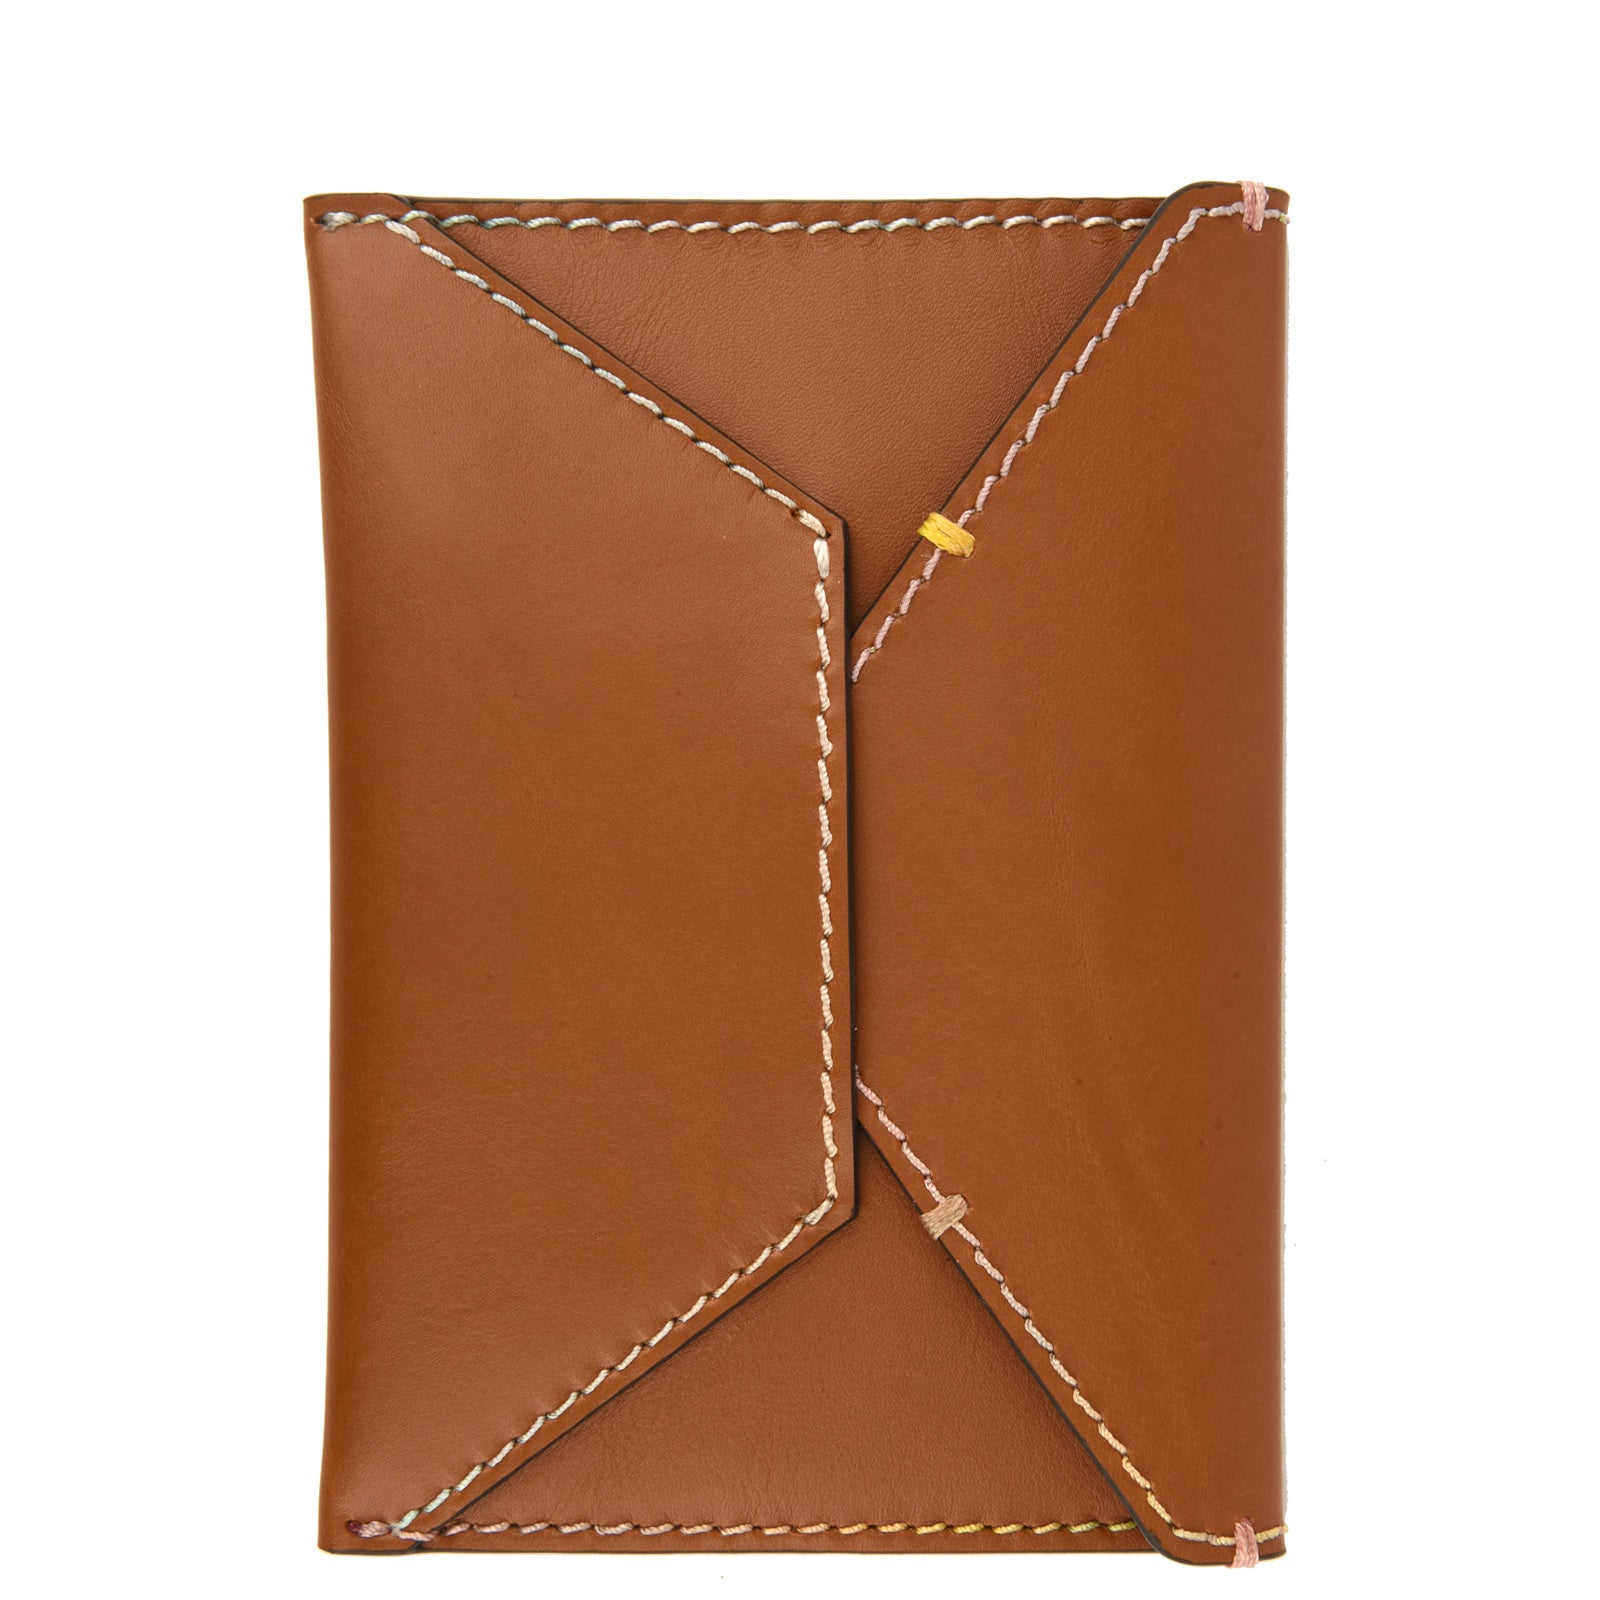 ENVELOPE - Colored stitched saddle leather